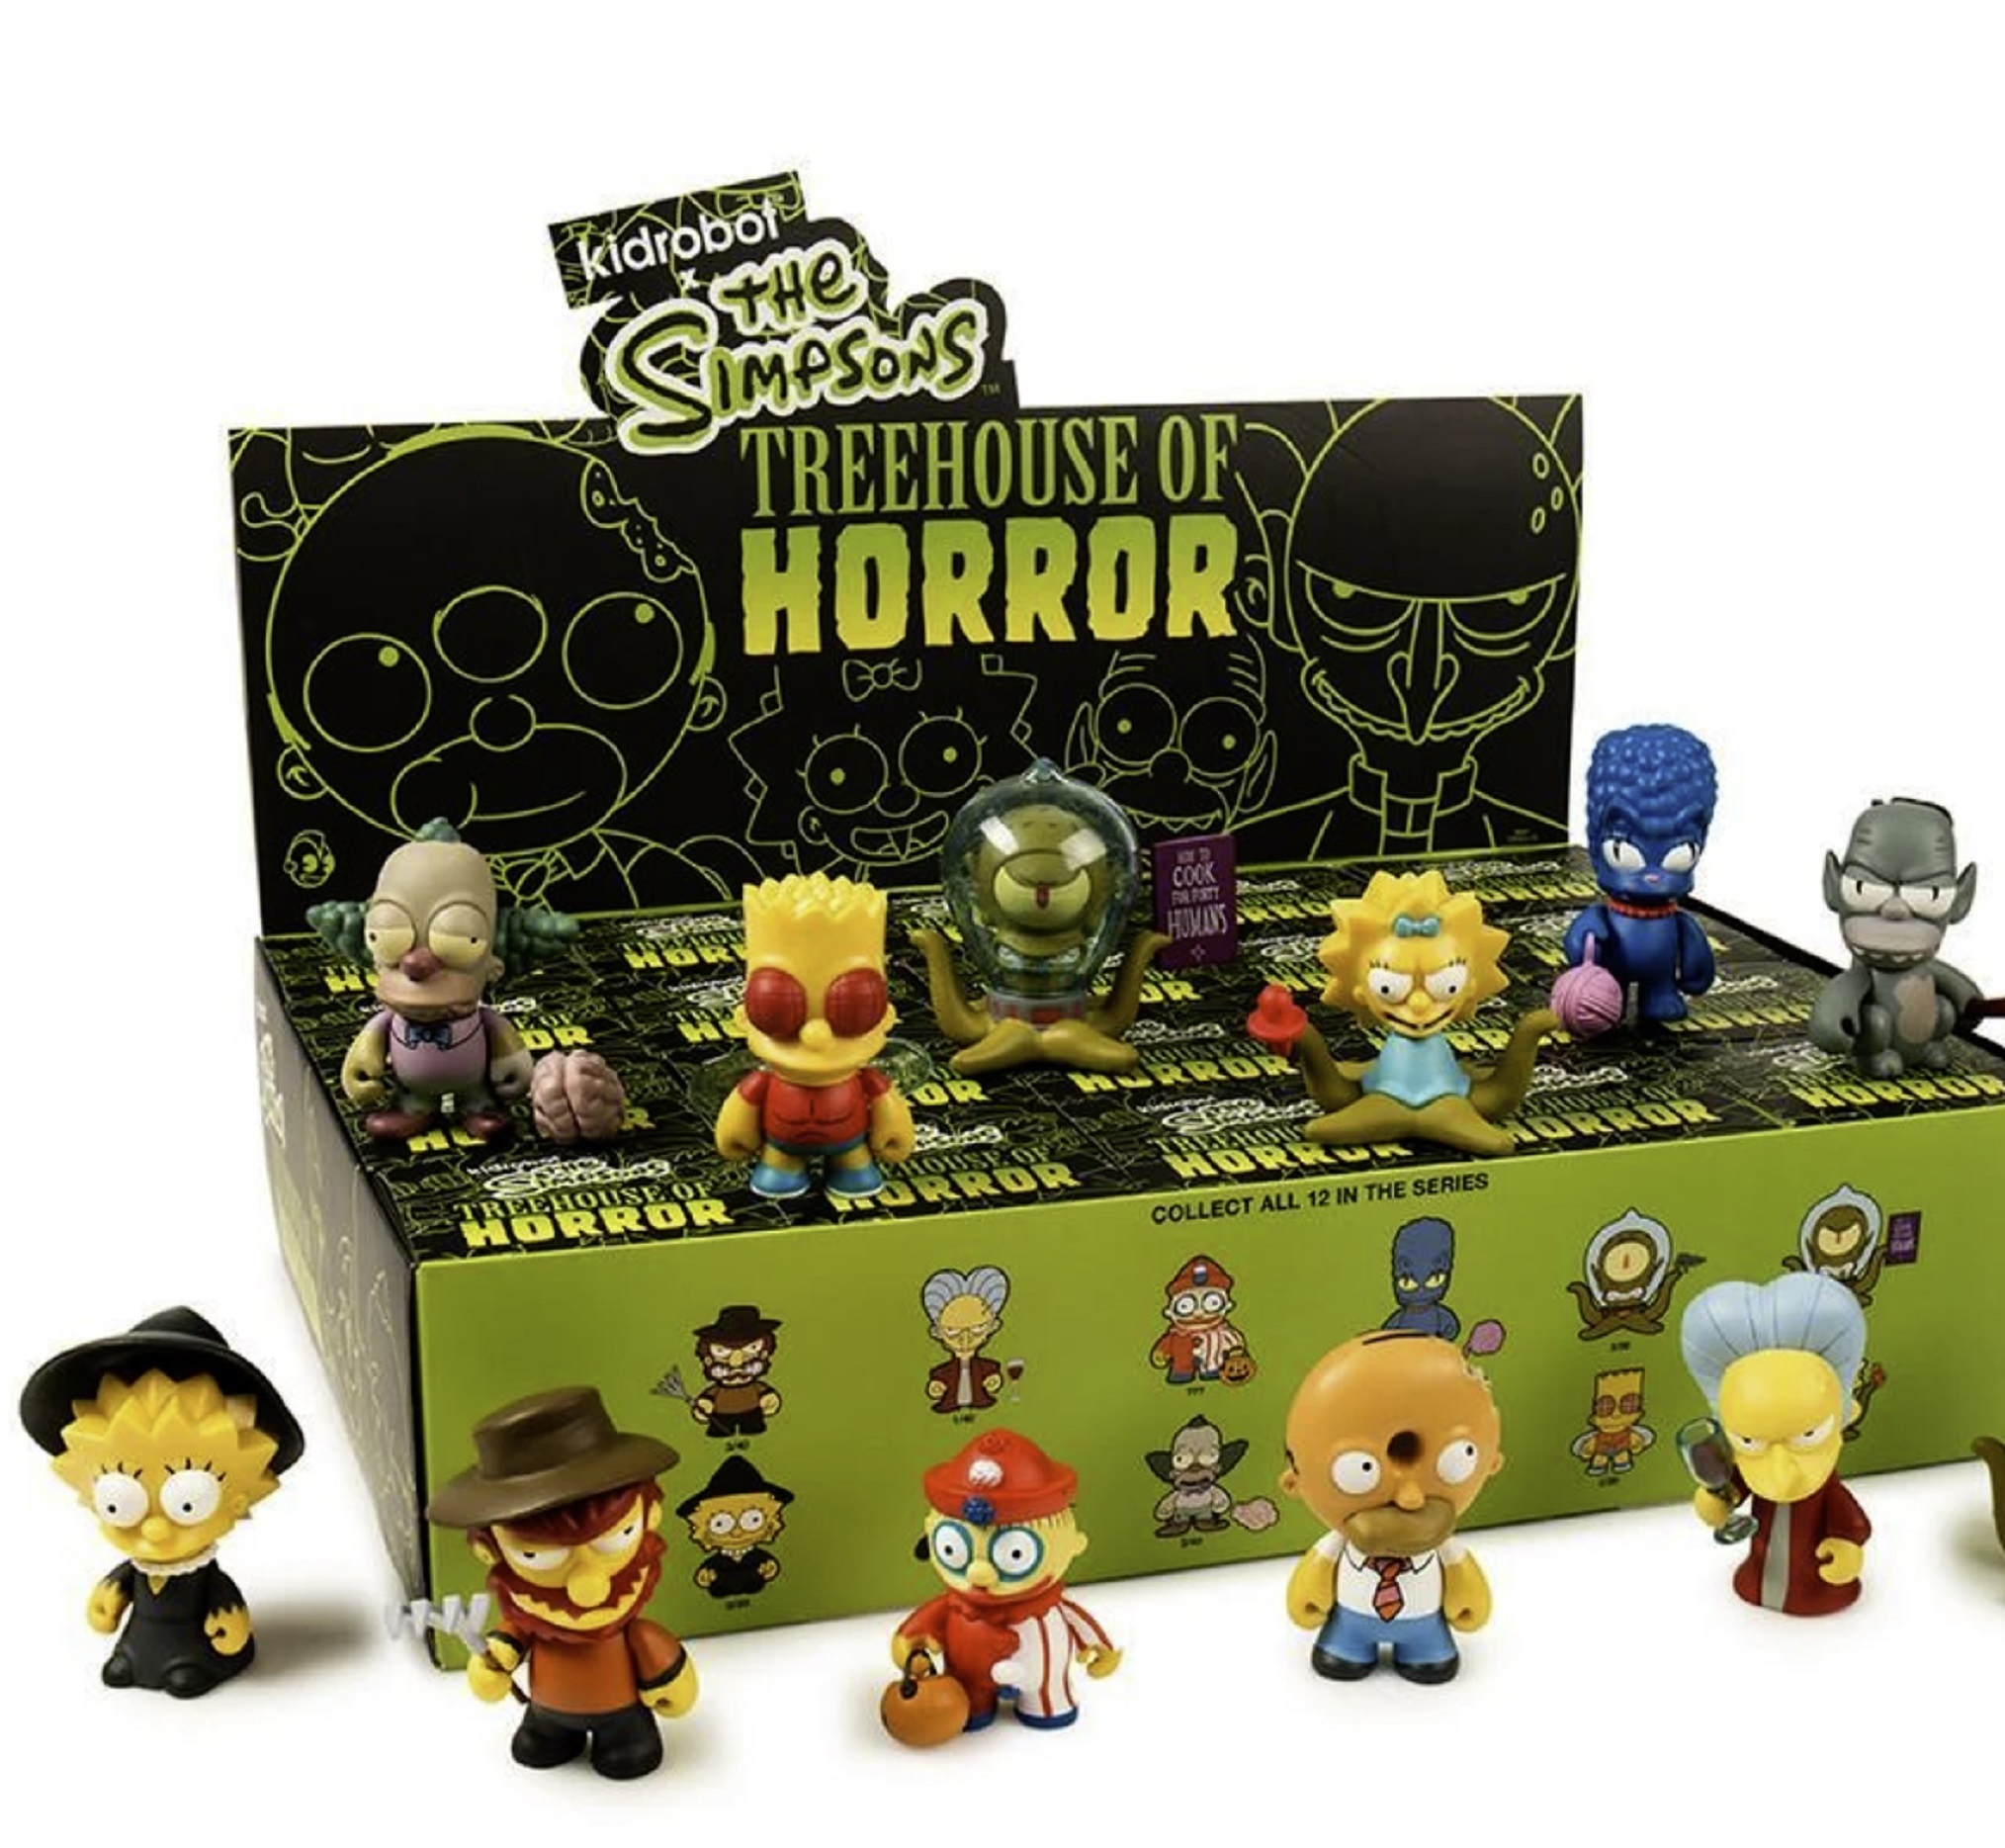 Simpsons Treehouse of Horror Halloween gift guide